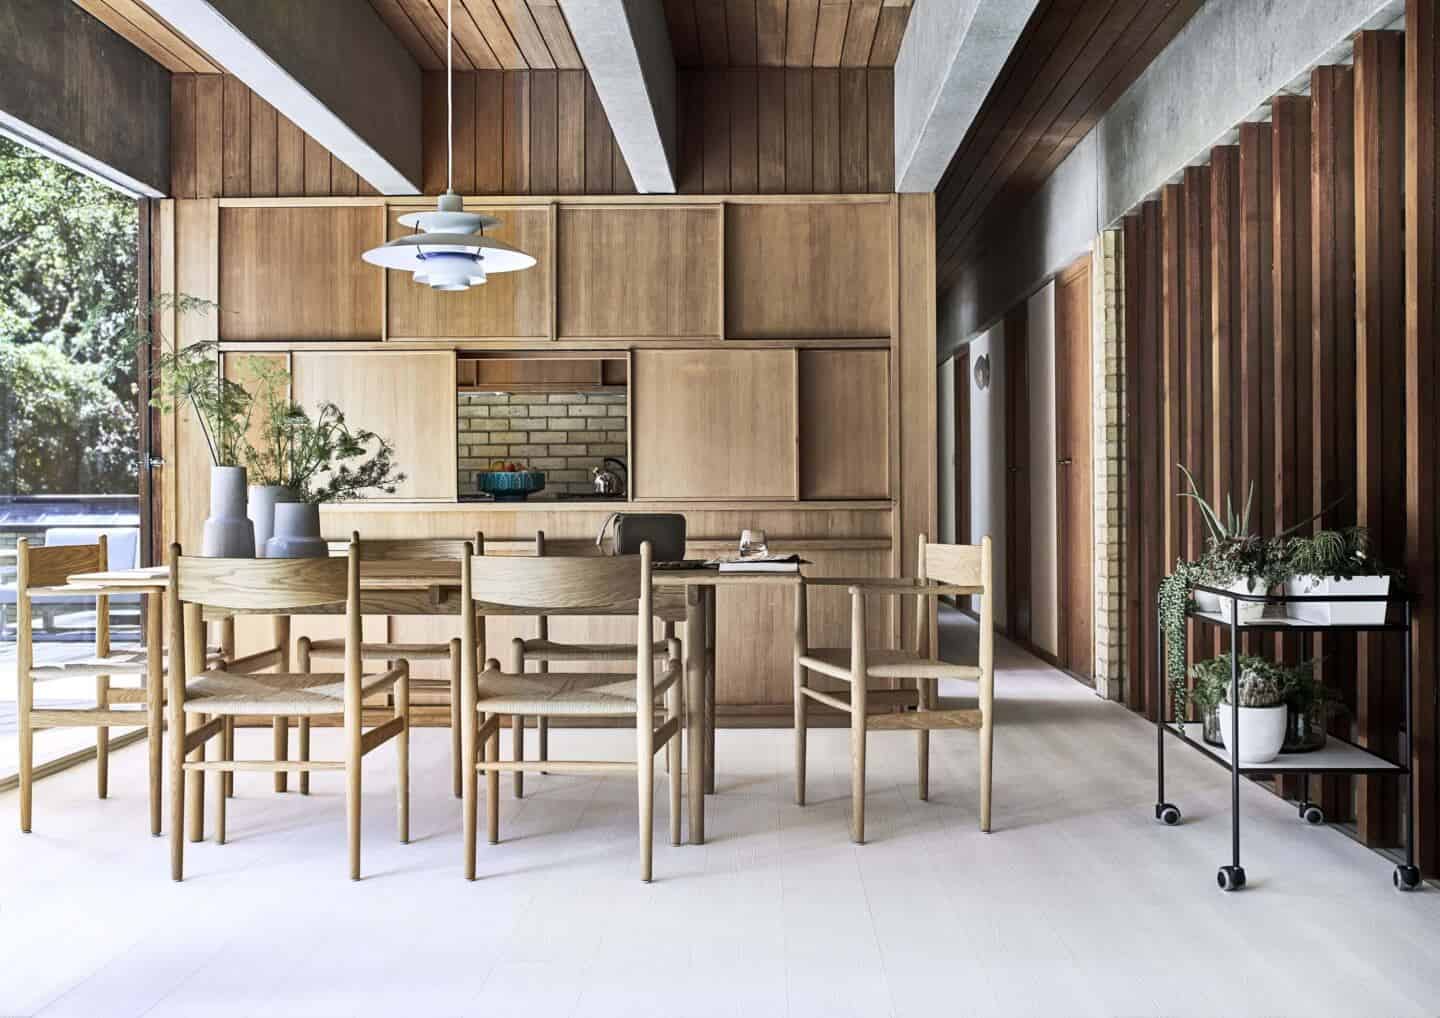 A Japandi style dining room in a mid-century Modern home with floor to ceiling windows, wooden panelling and a Louis Poulsen PH5 Suspension Light